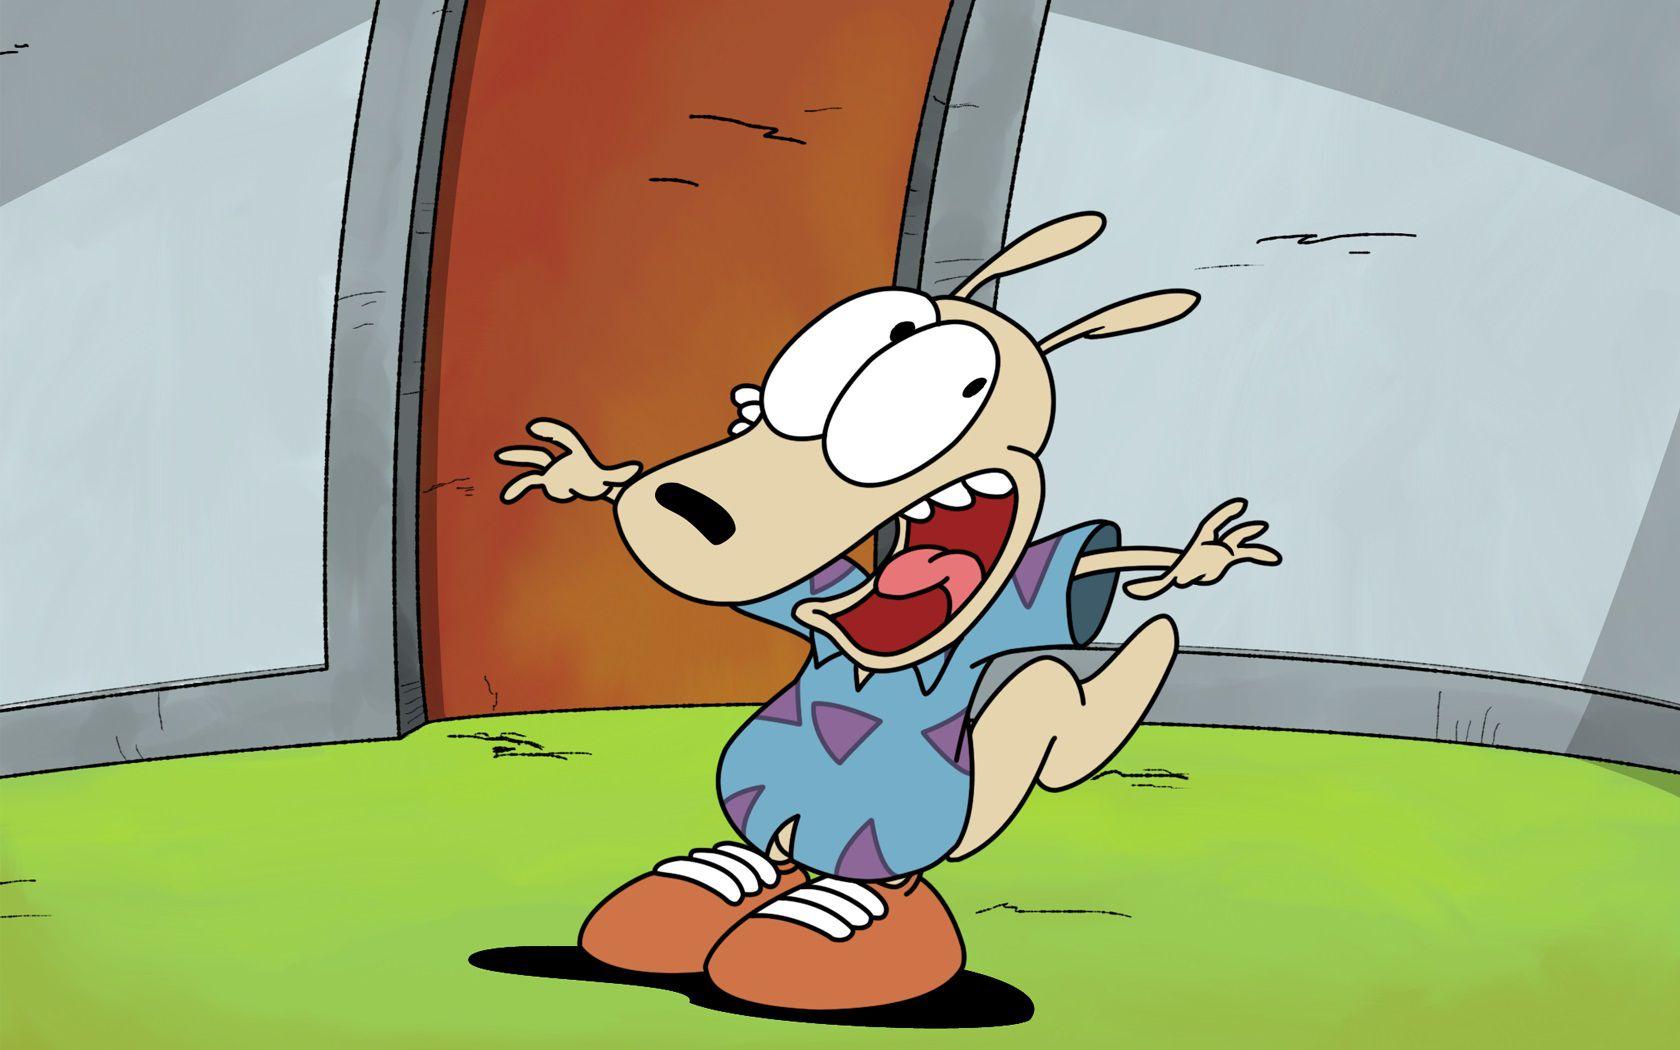 Rocko's Modern Life is coming back to Nickelodeon